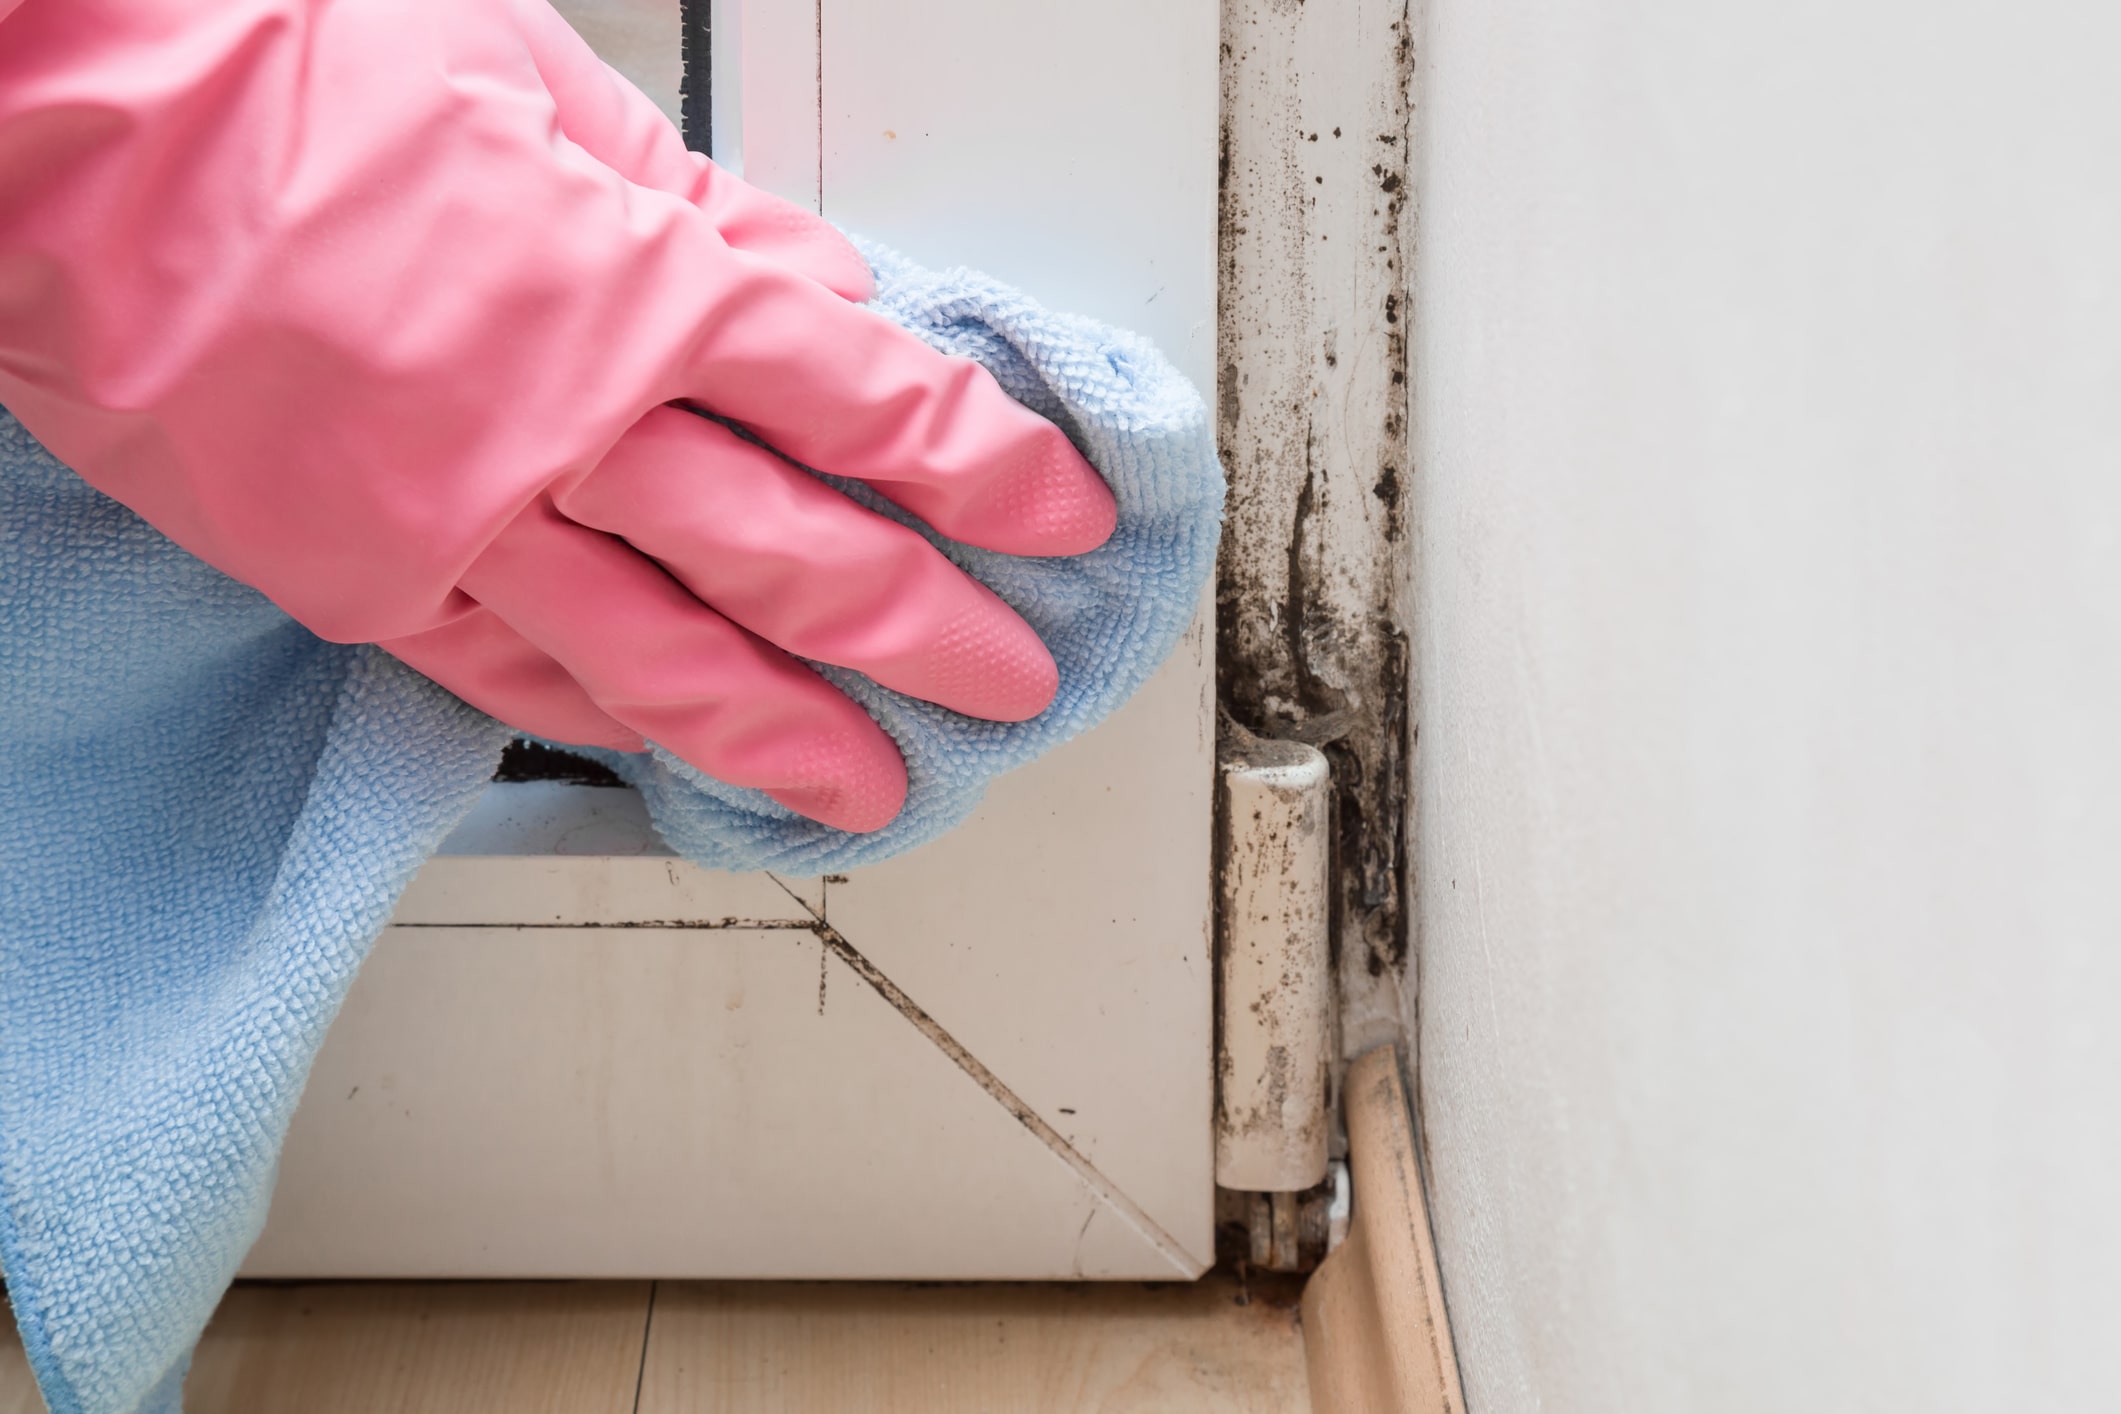 How to Remove and Prevent Black Mold on Windows